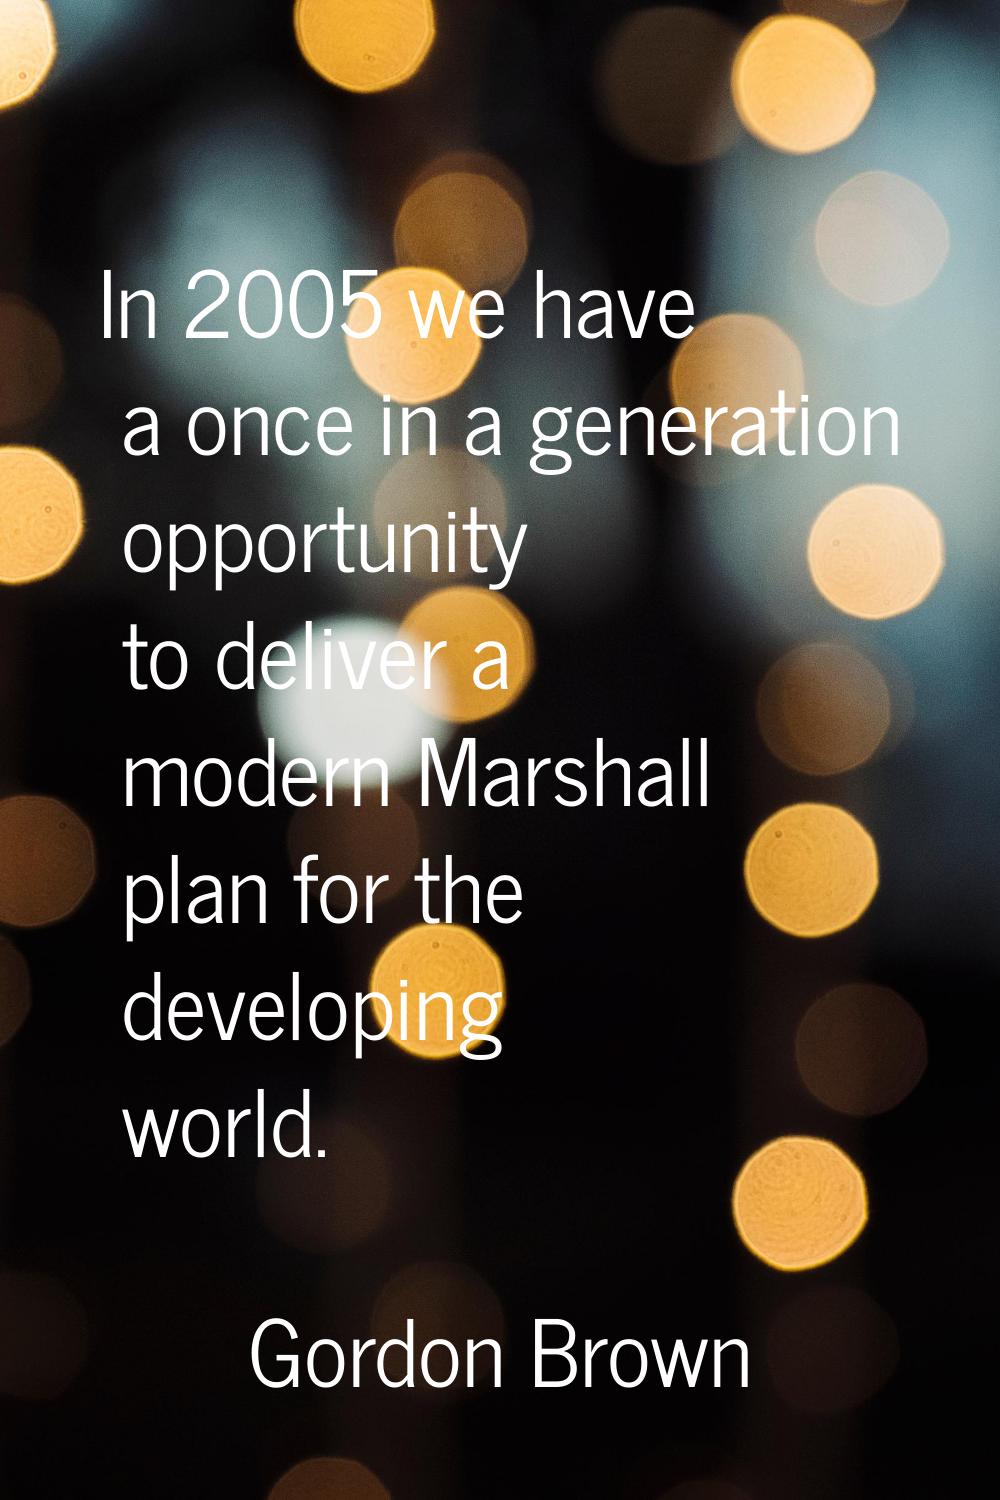 In 2005 we have a once in a generation opportunity to deliver a modern Marshall plan for the develo